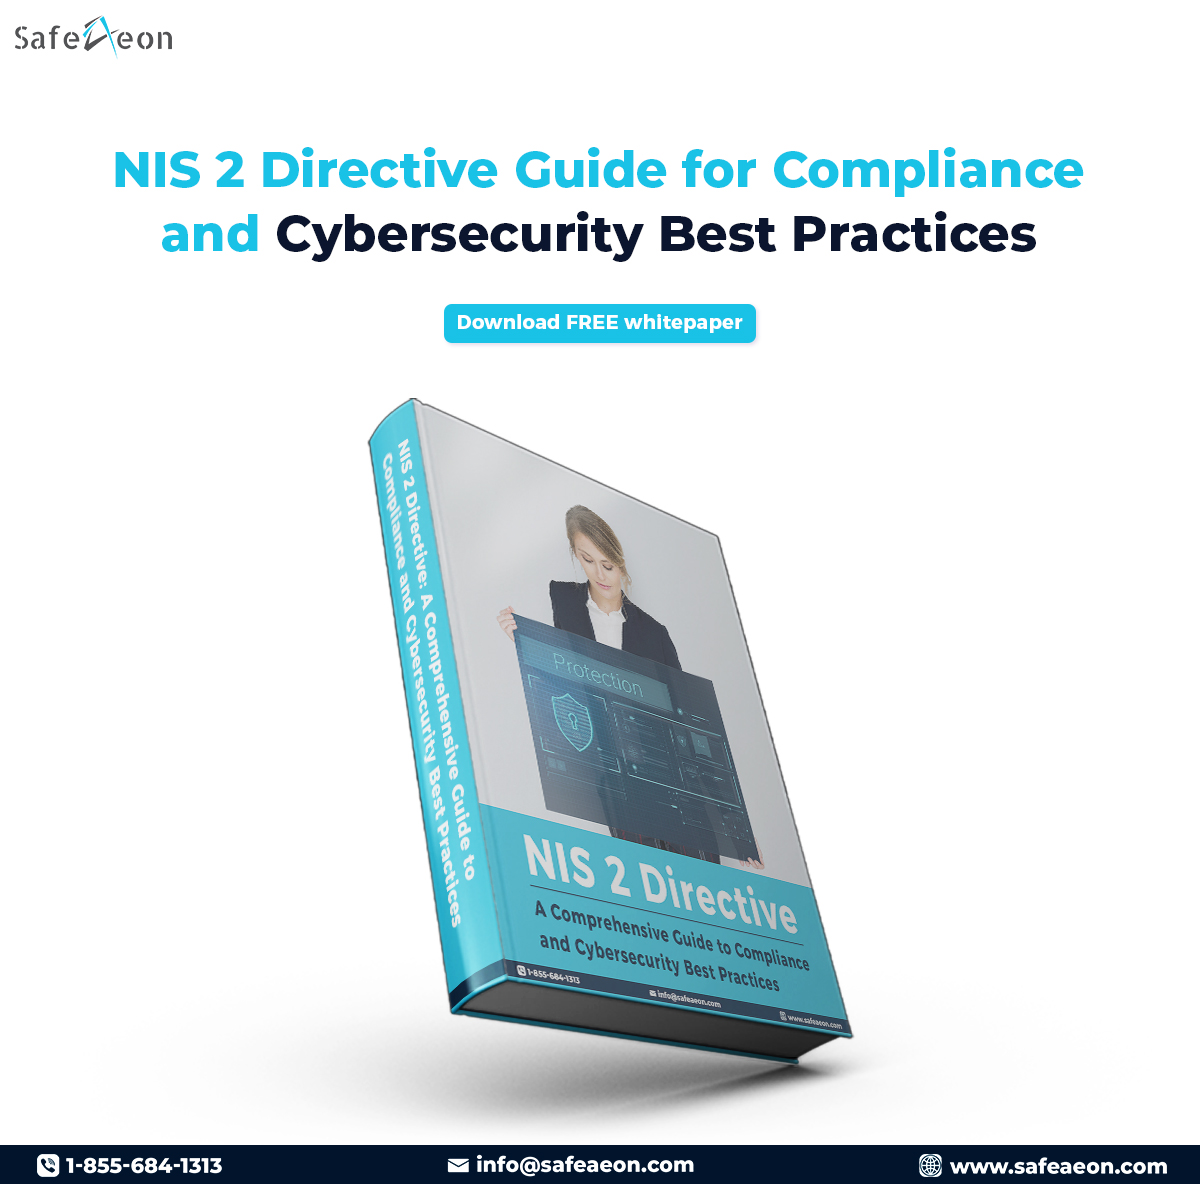 🌐 Empower your cybersecurity with our NIS 2 Directive guide! Discover insights to strengthen defenses. 🔒 Ready to navigate confidently? Dive into our whitepaper for resilience. 

Explore at safeaeon.com/resources/whit…
.
.
.
#NIS2Directive #Cybersecurity #Safeaeon #BestPractices